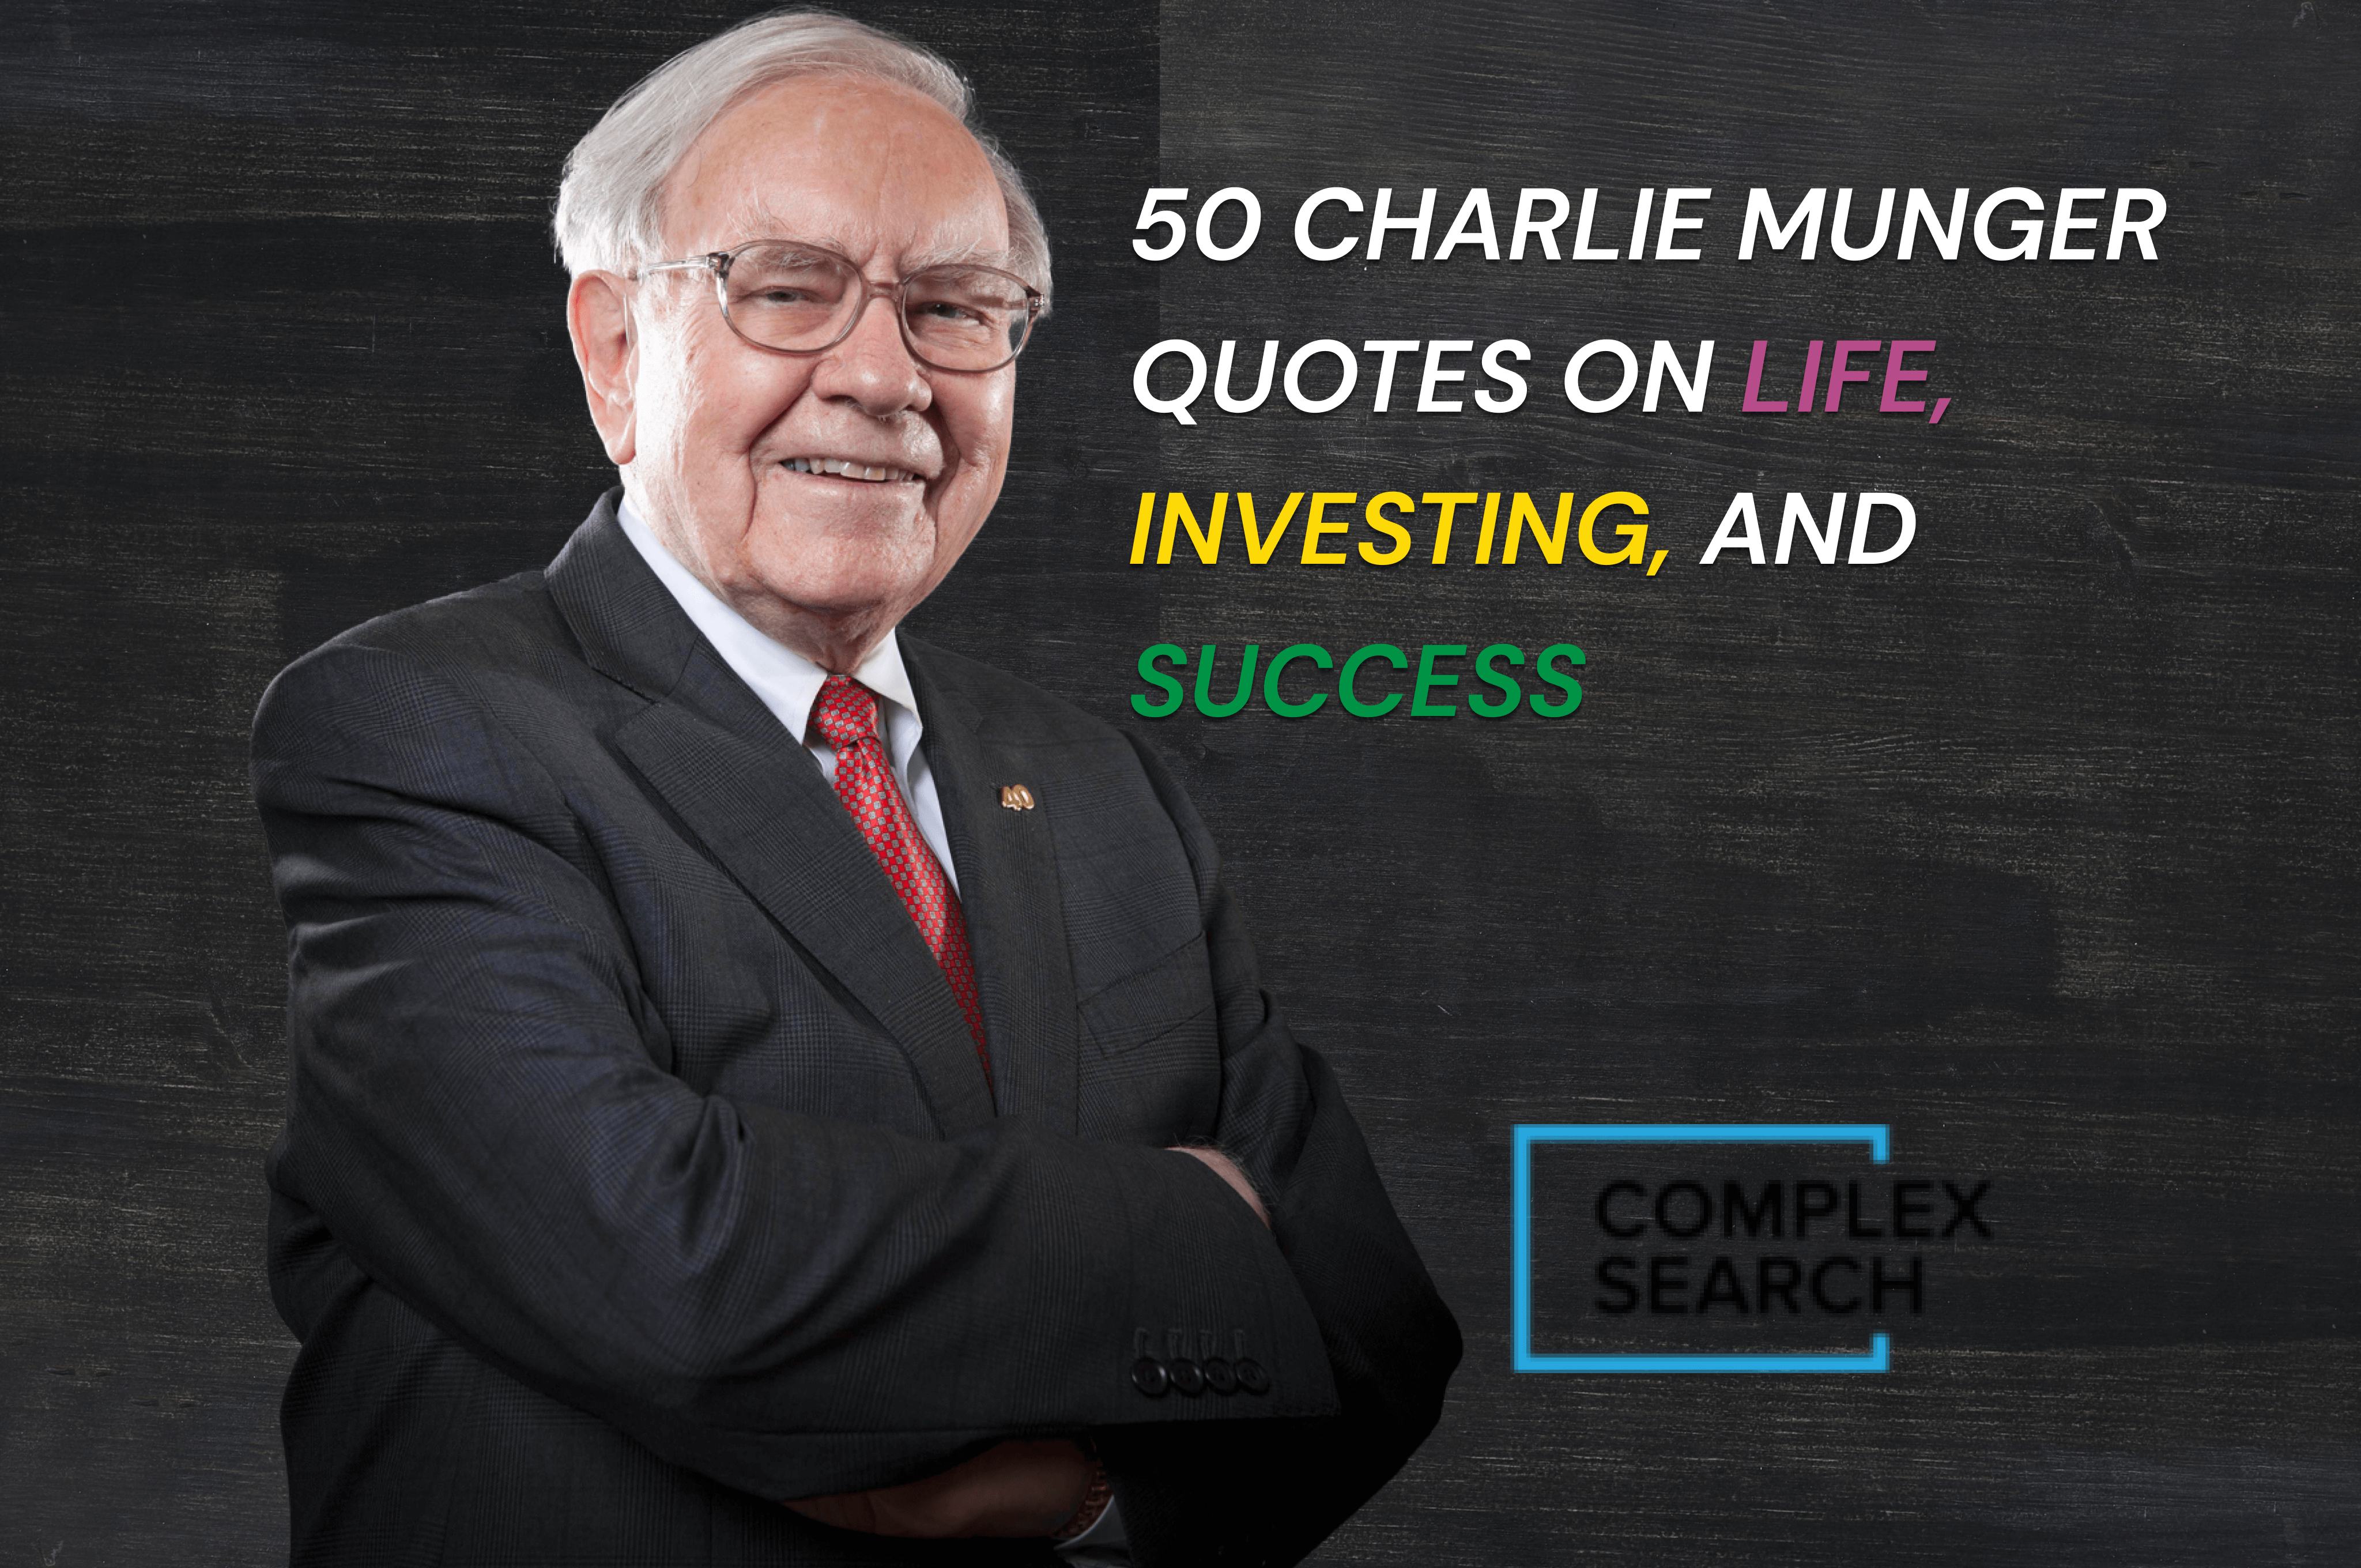 50 Charlie Munger Quotes On Life, Investing, And Success